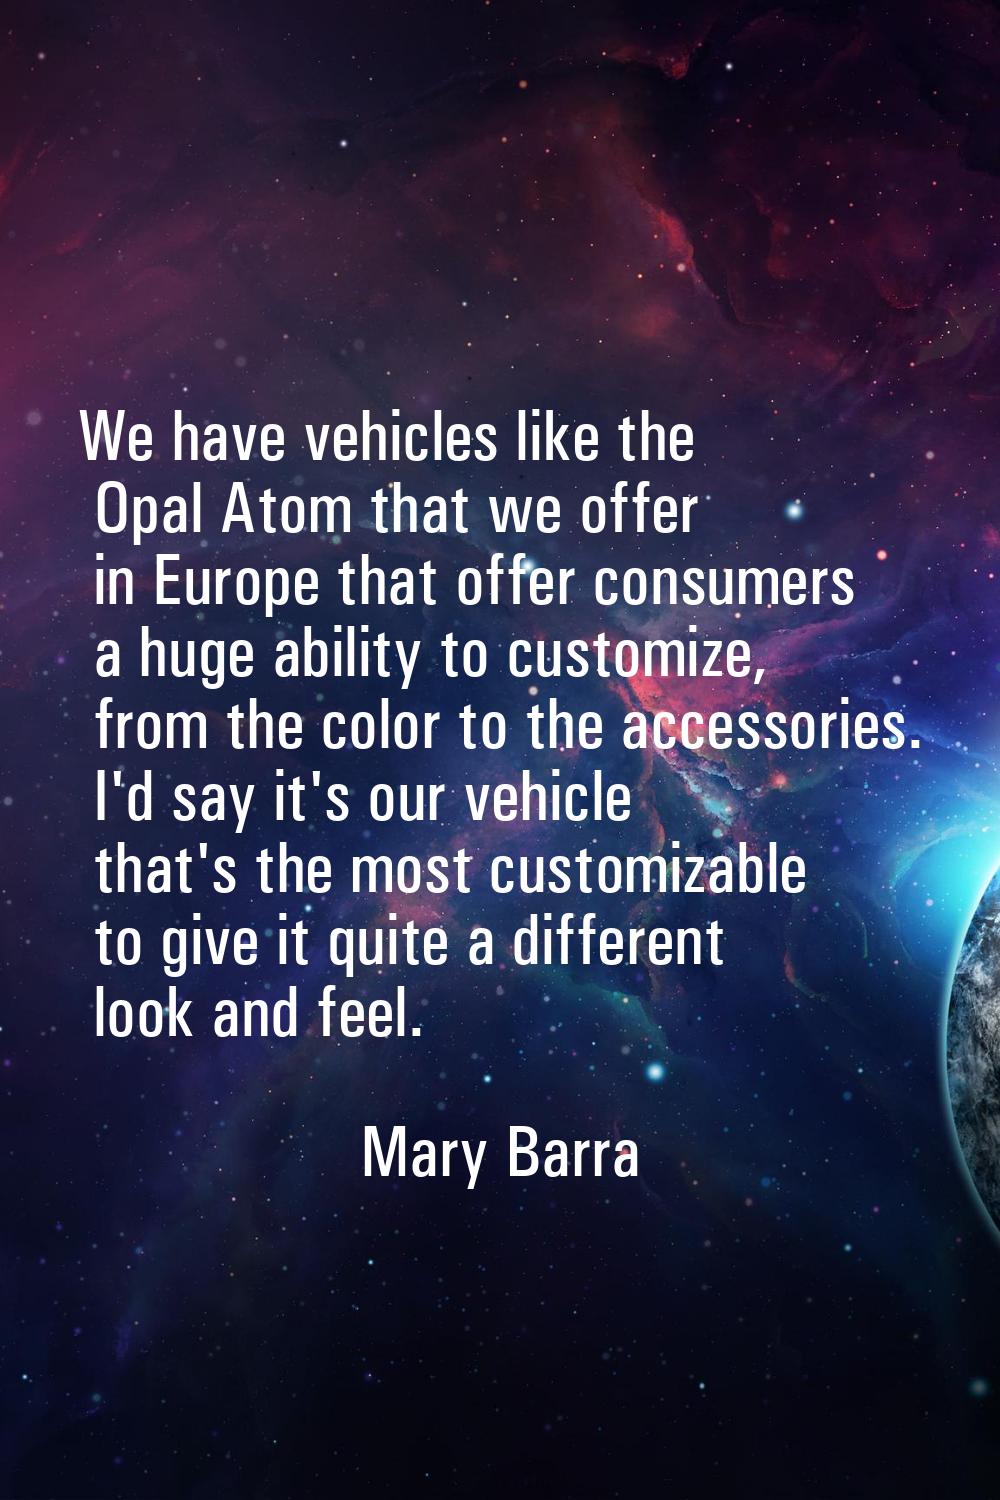 We have vehicles like the Opal Atom that we offer in Europe that offer consumers a huge ability to 